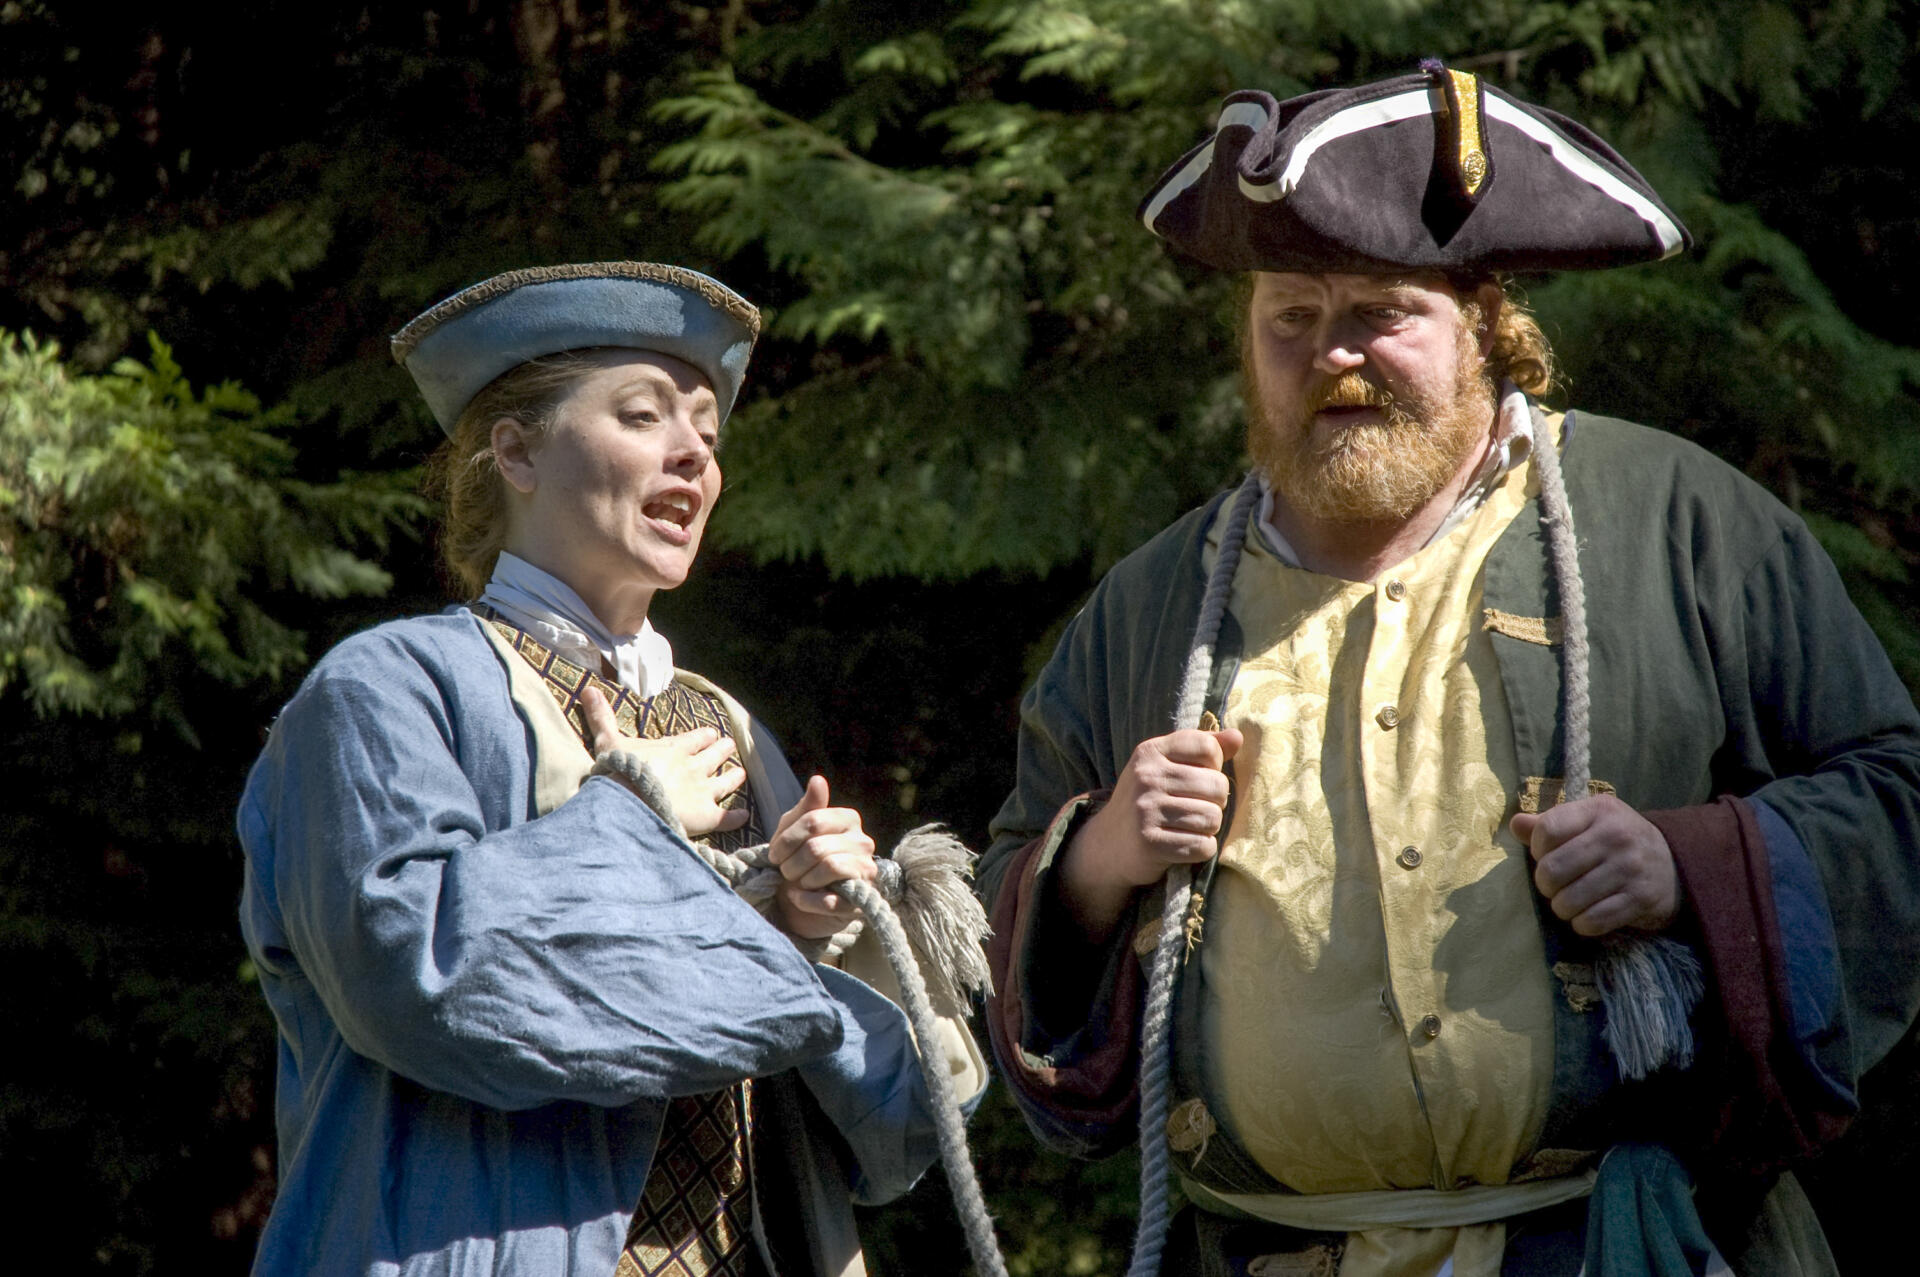 Courtney Bohl and Don MacEllis in Comedy of Errors - 2009